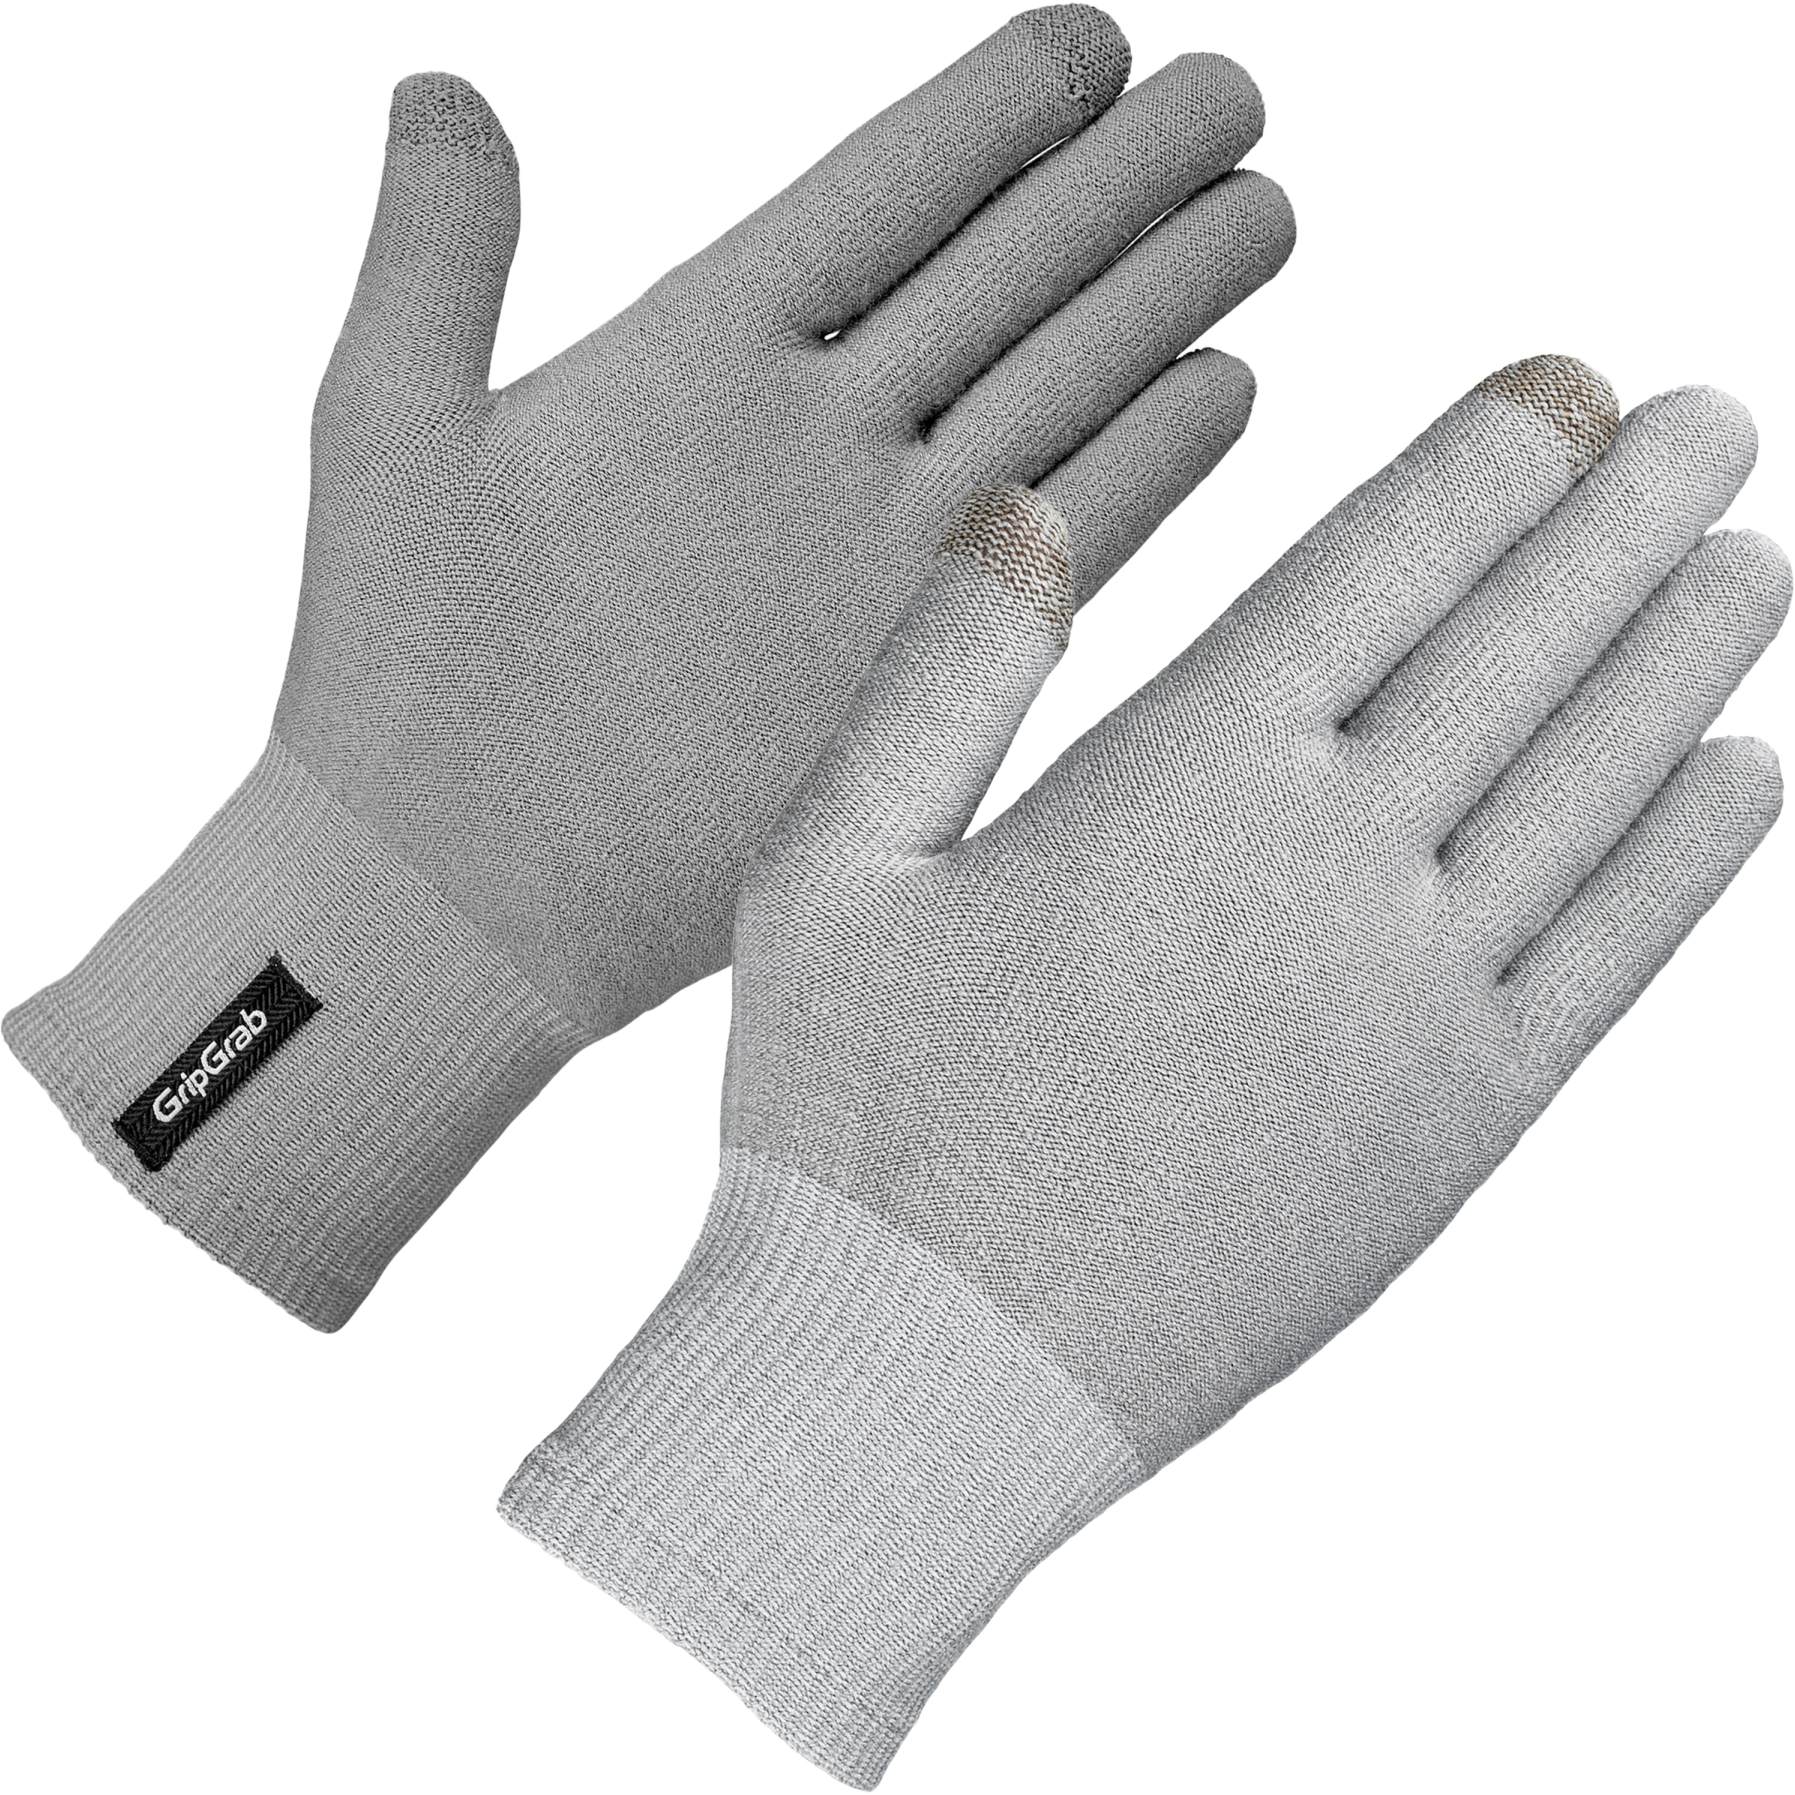 Picture of GripGrab Merino Liner Glove - Grey